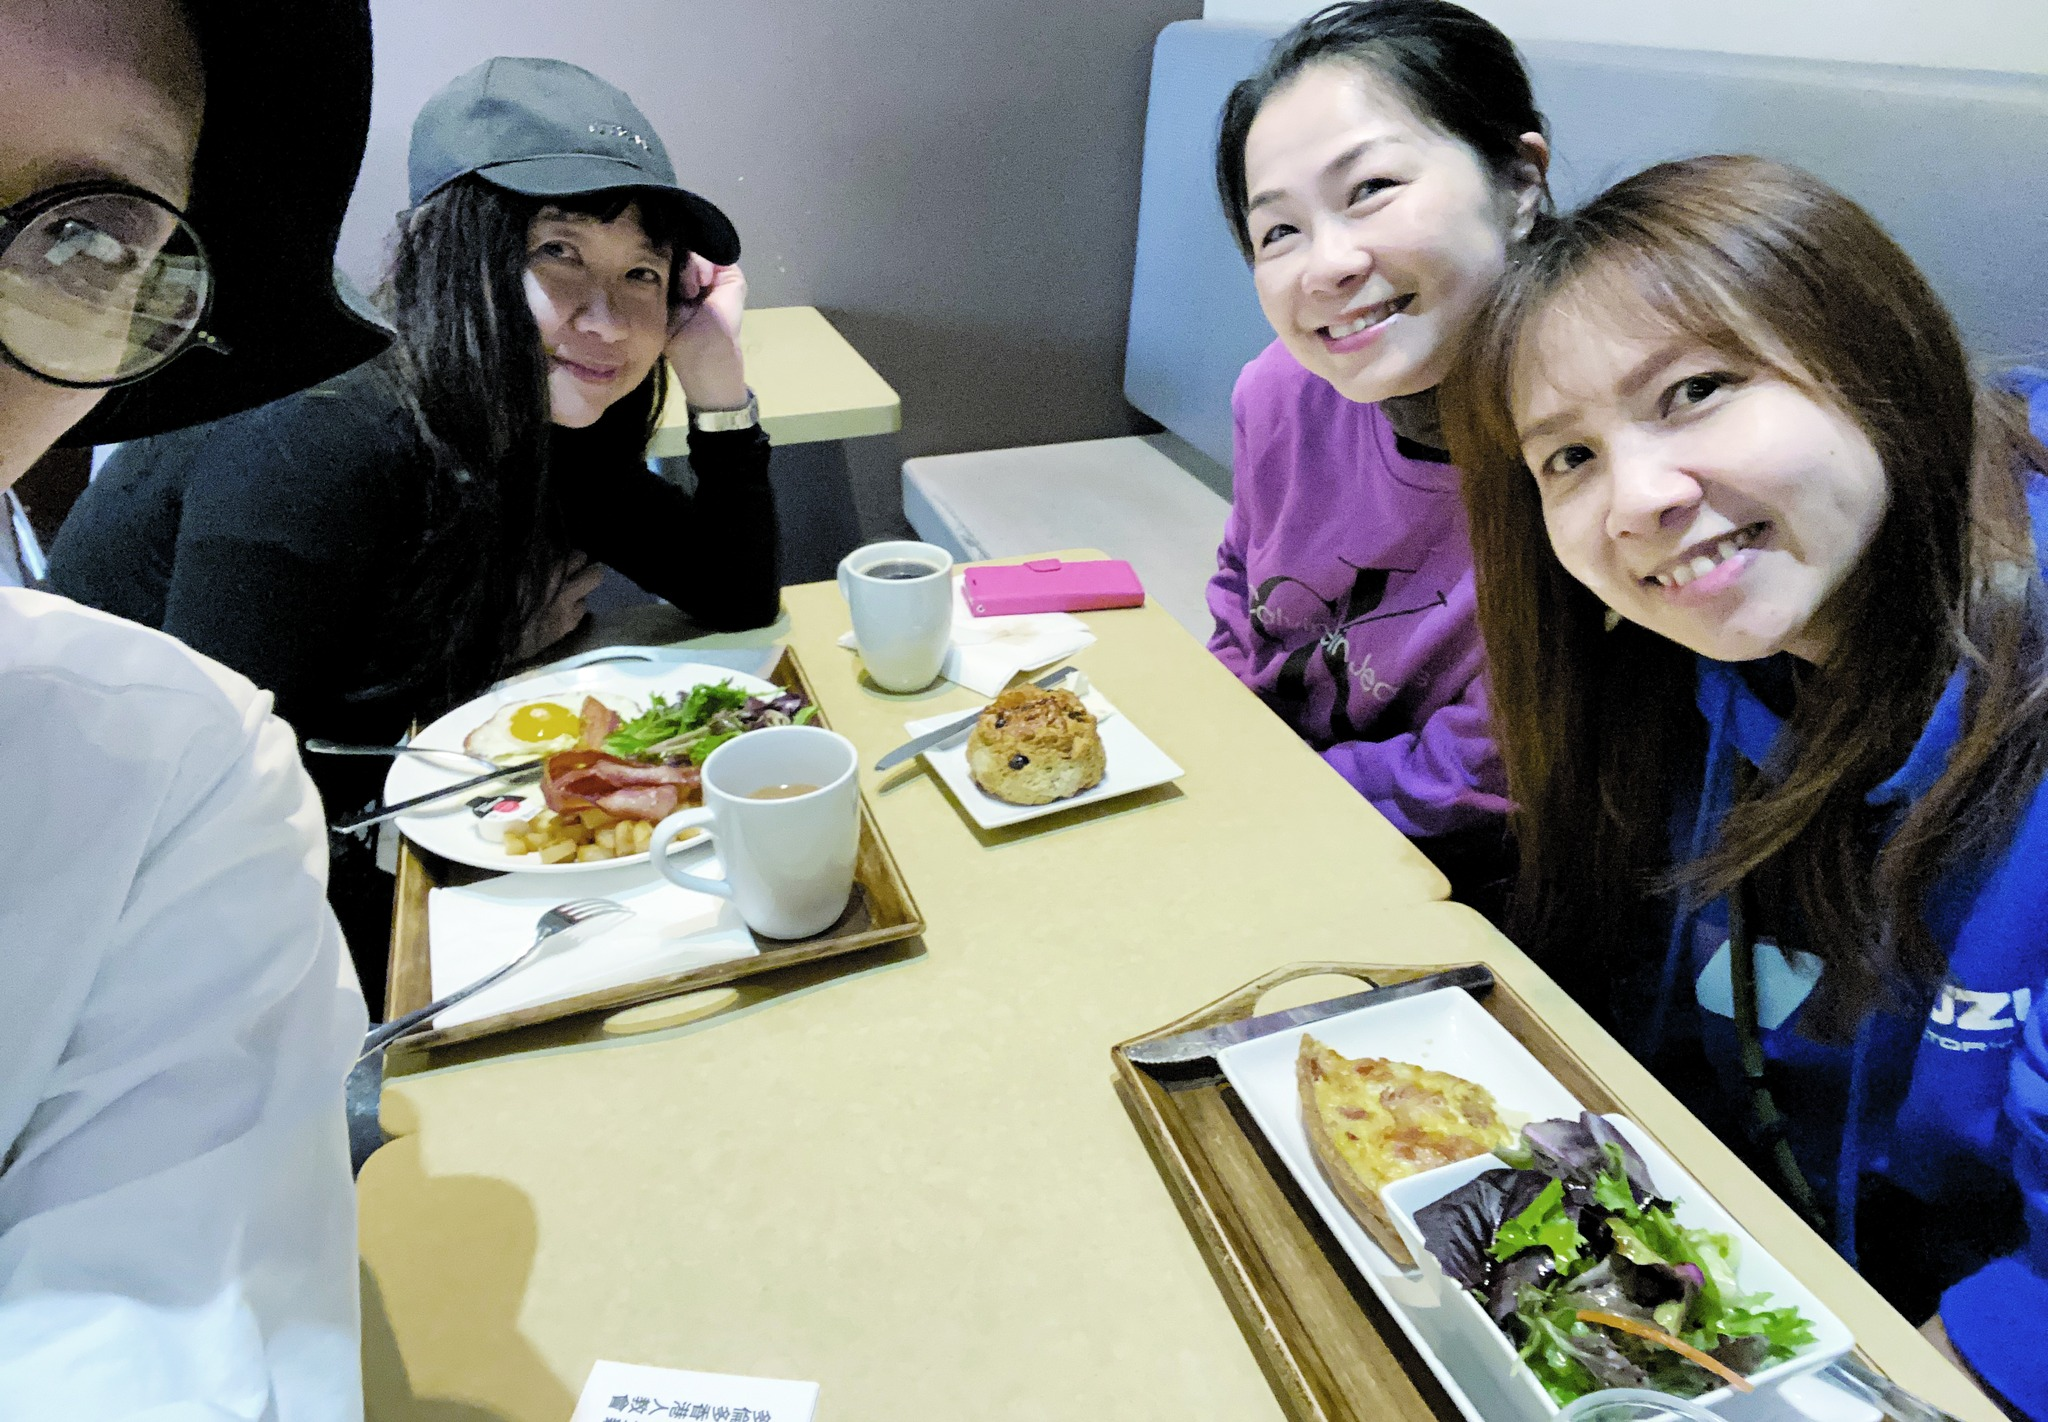 Four young people smiling for a selfie around a table with food